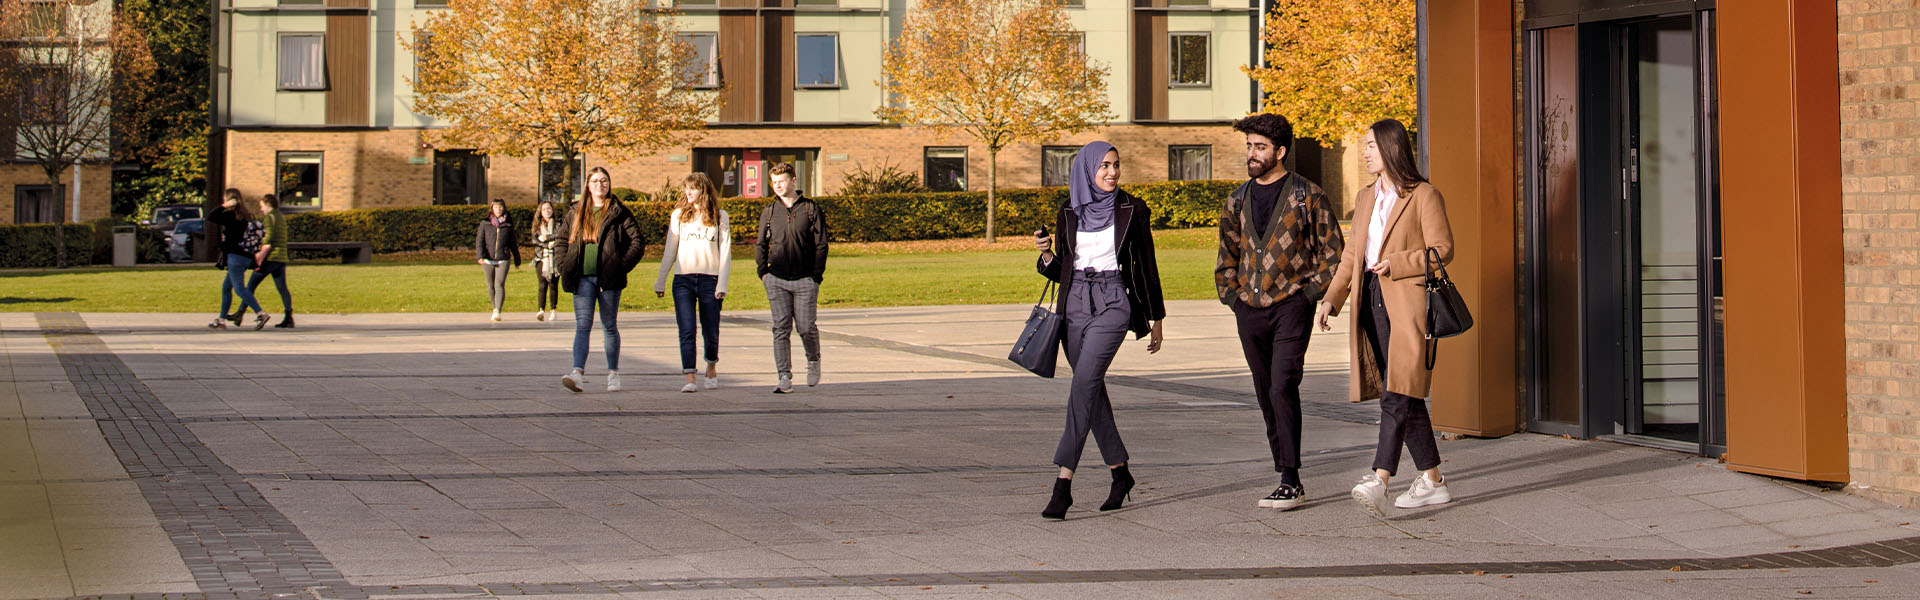 Students in a group in Lancaster Square on a sunny day.